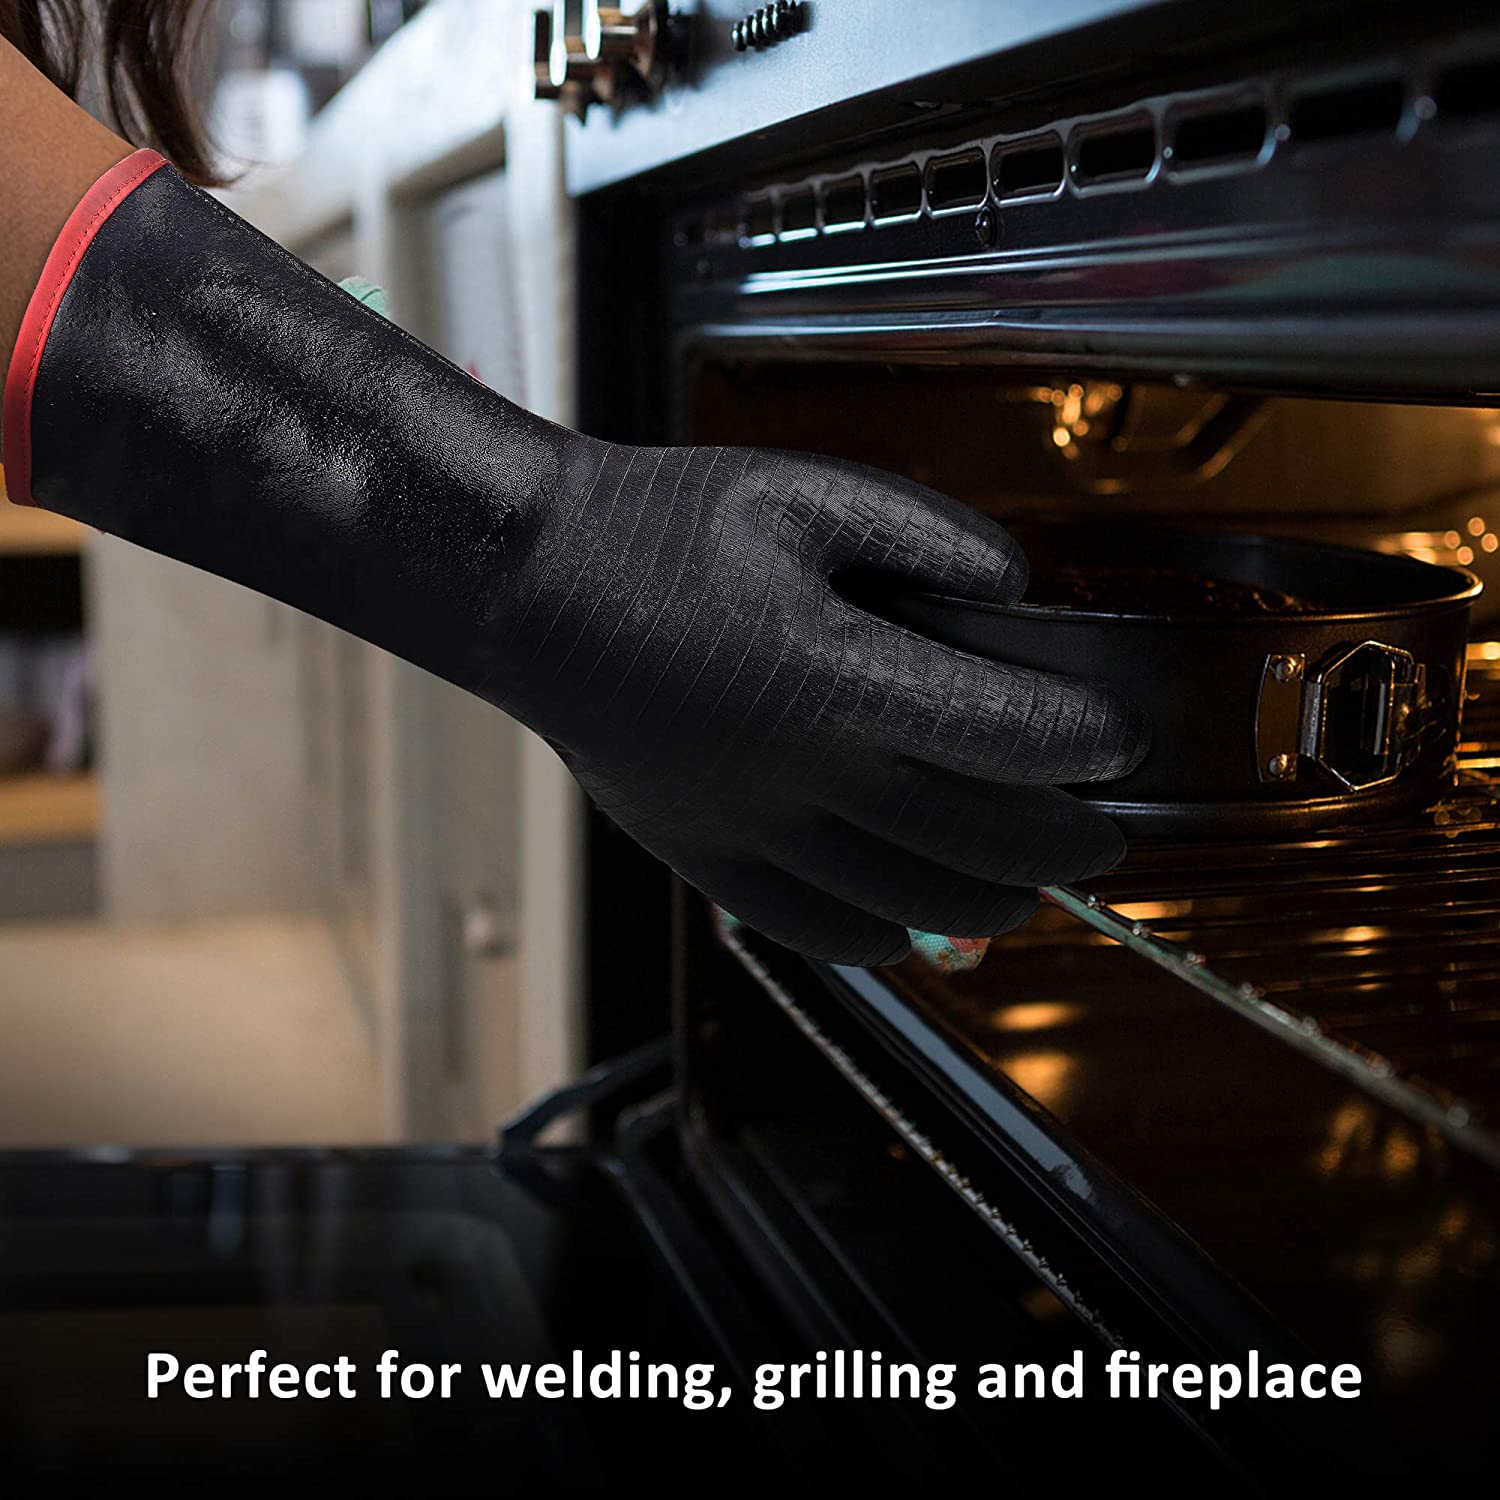 Heat Resistant-Smoker BBQ Gloves 14 Inches,932℉, Grill, Cooking Barbecue Gloves, to Handling Heat Food Right on Your Fryer,Grill,Oven. Waterproof, Fireproof, Oil Resistant Neoprene Coating - image 5 of 7